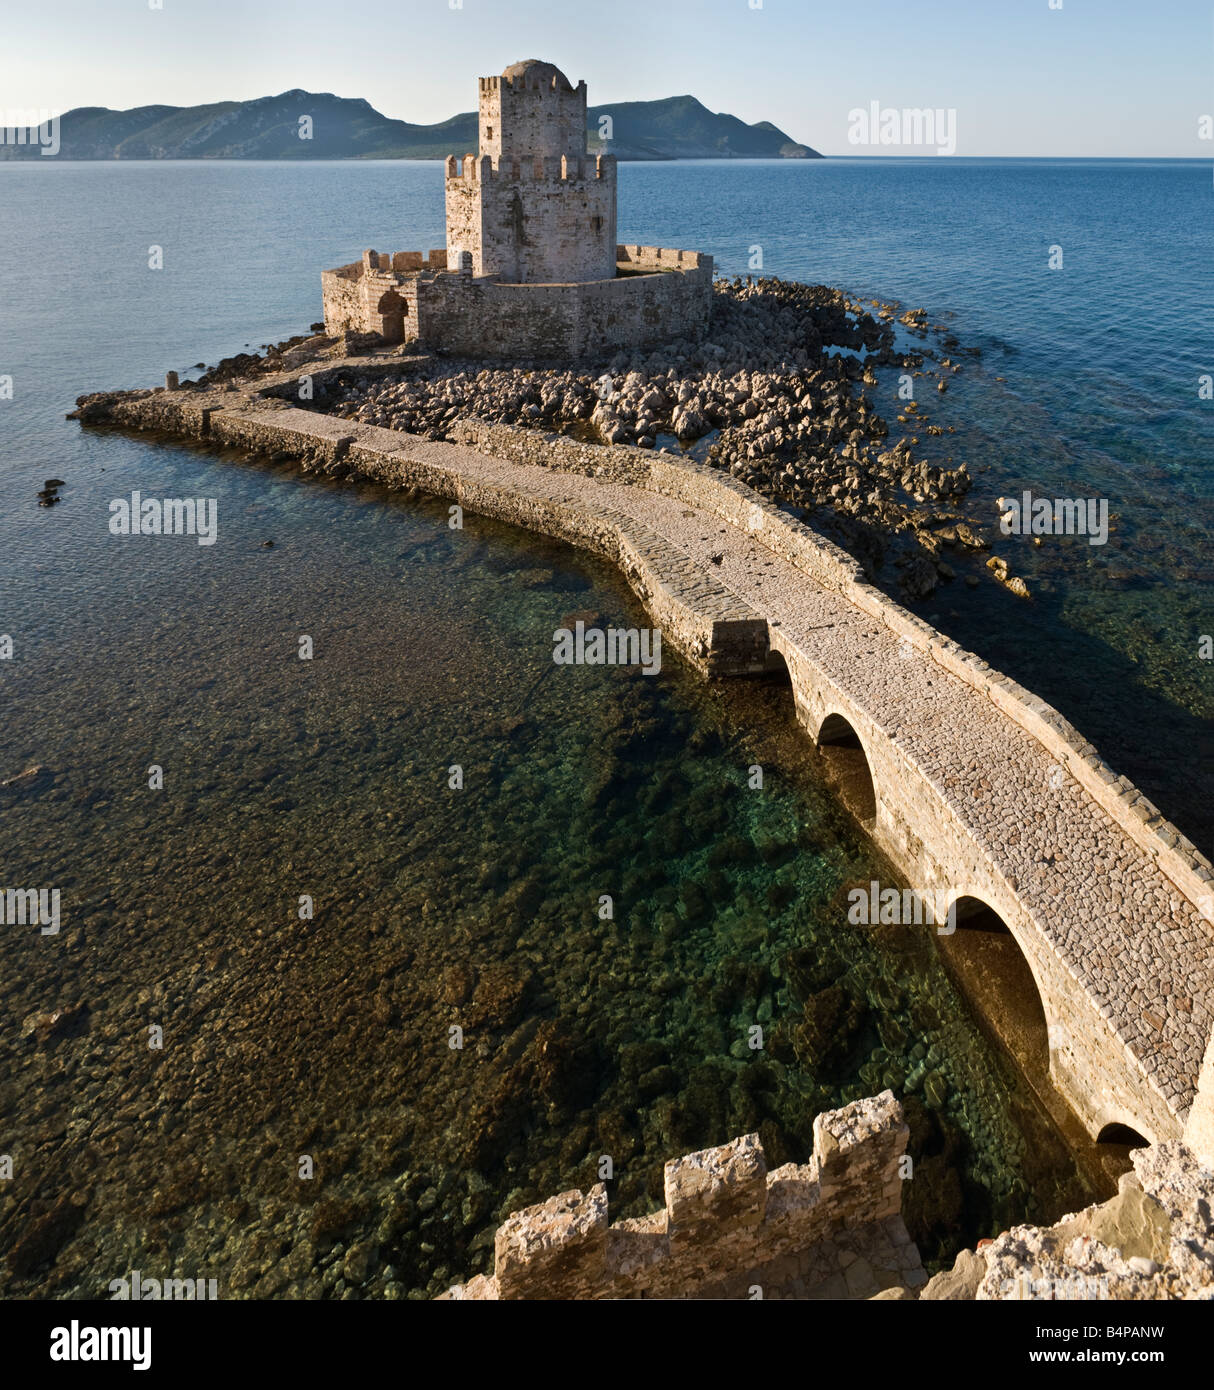 Looking down on the Bourtzi tower at Methoni, Messinia, Southern Peloponnese, Greece Stock Photo